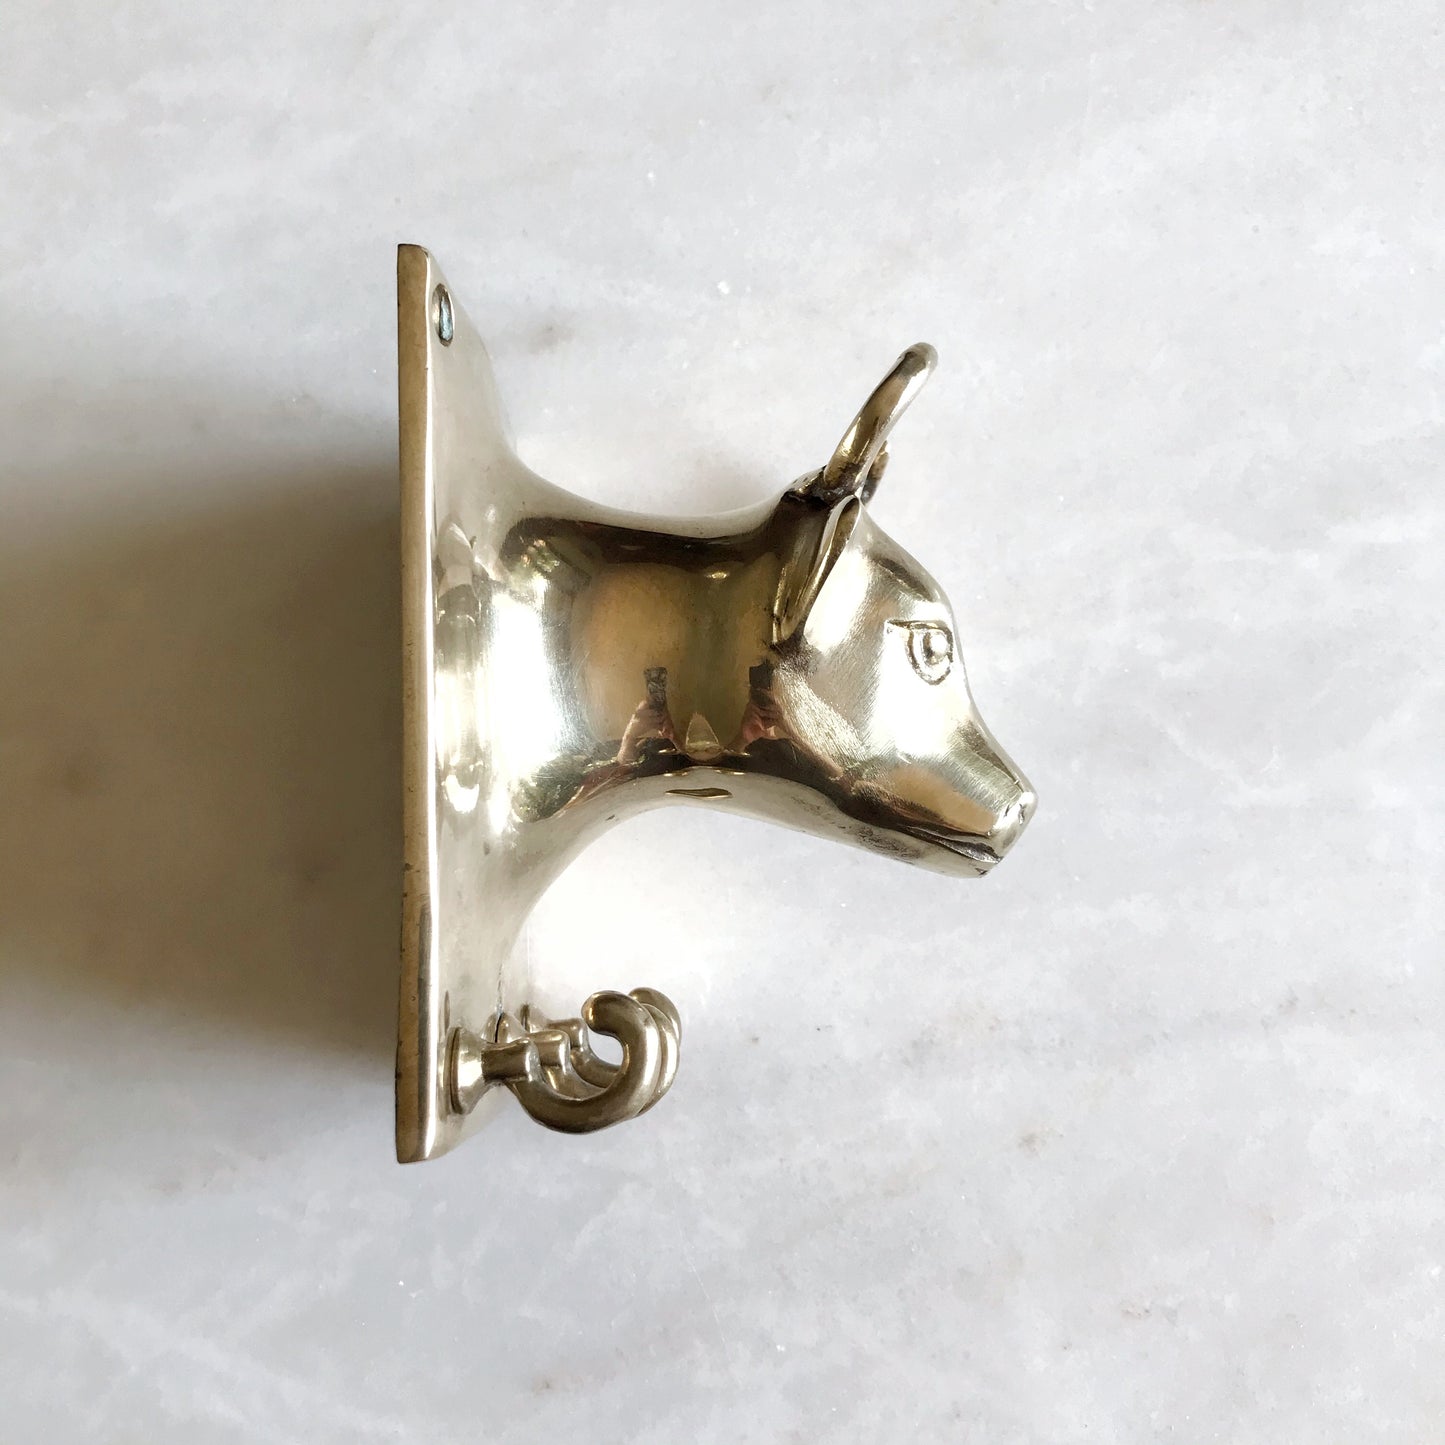 Vintage Brass Bull Wall Piece with Hooks